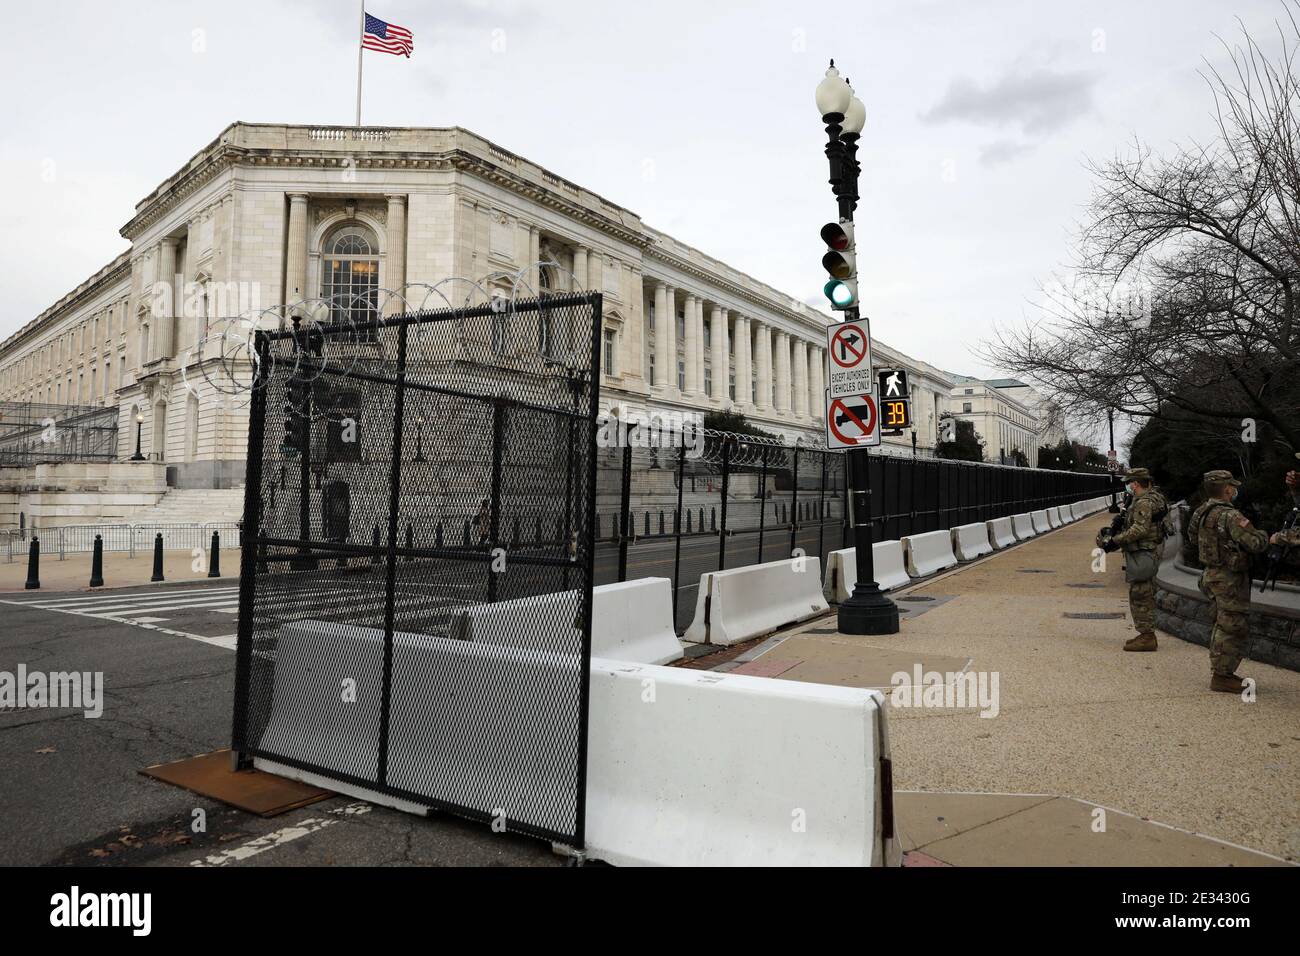 Members of the National Guard secure the area around U.S. Capitol ahead of the upcoming inauguration for President-elect Joe Biden in Washington on January 16, 2021. Photo by Yuri Gripas/ABACAPRESS.COM Stock Photo